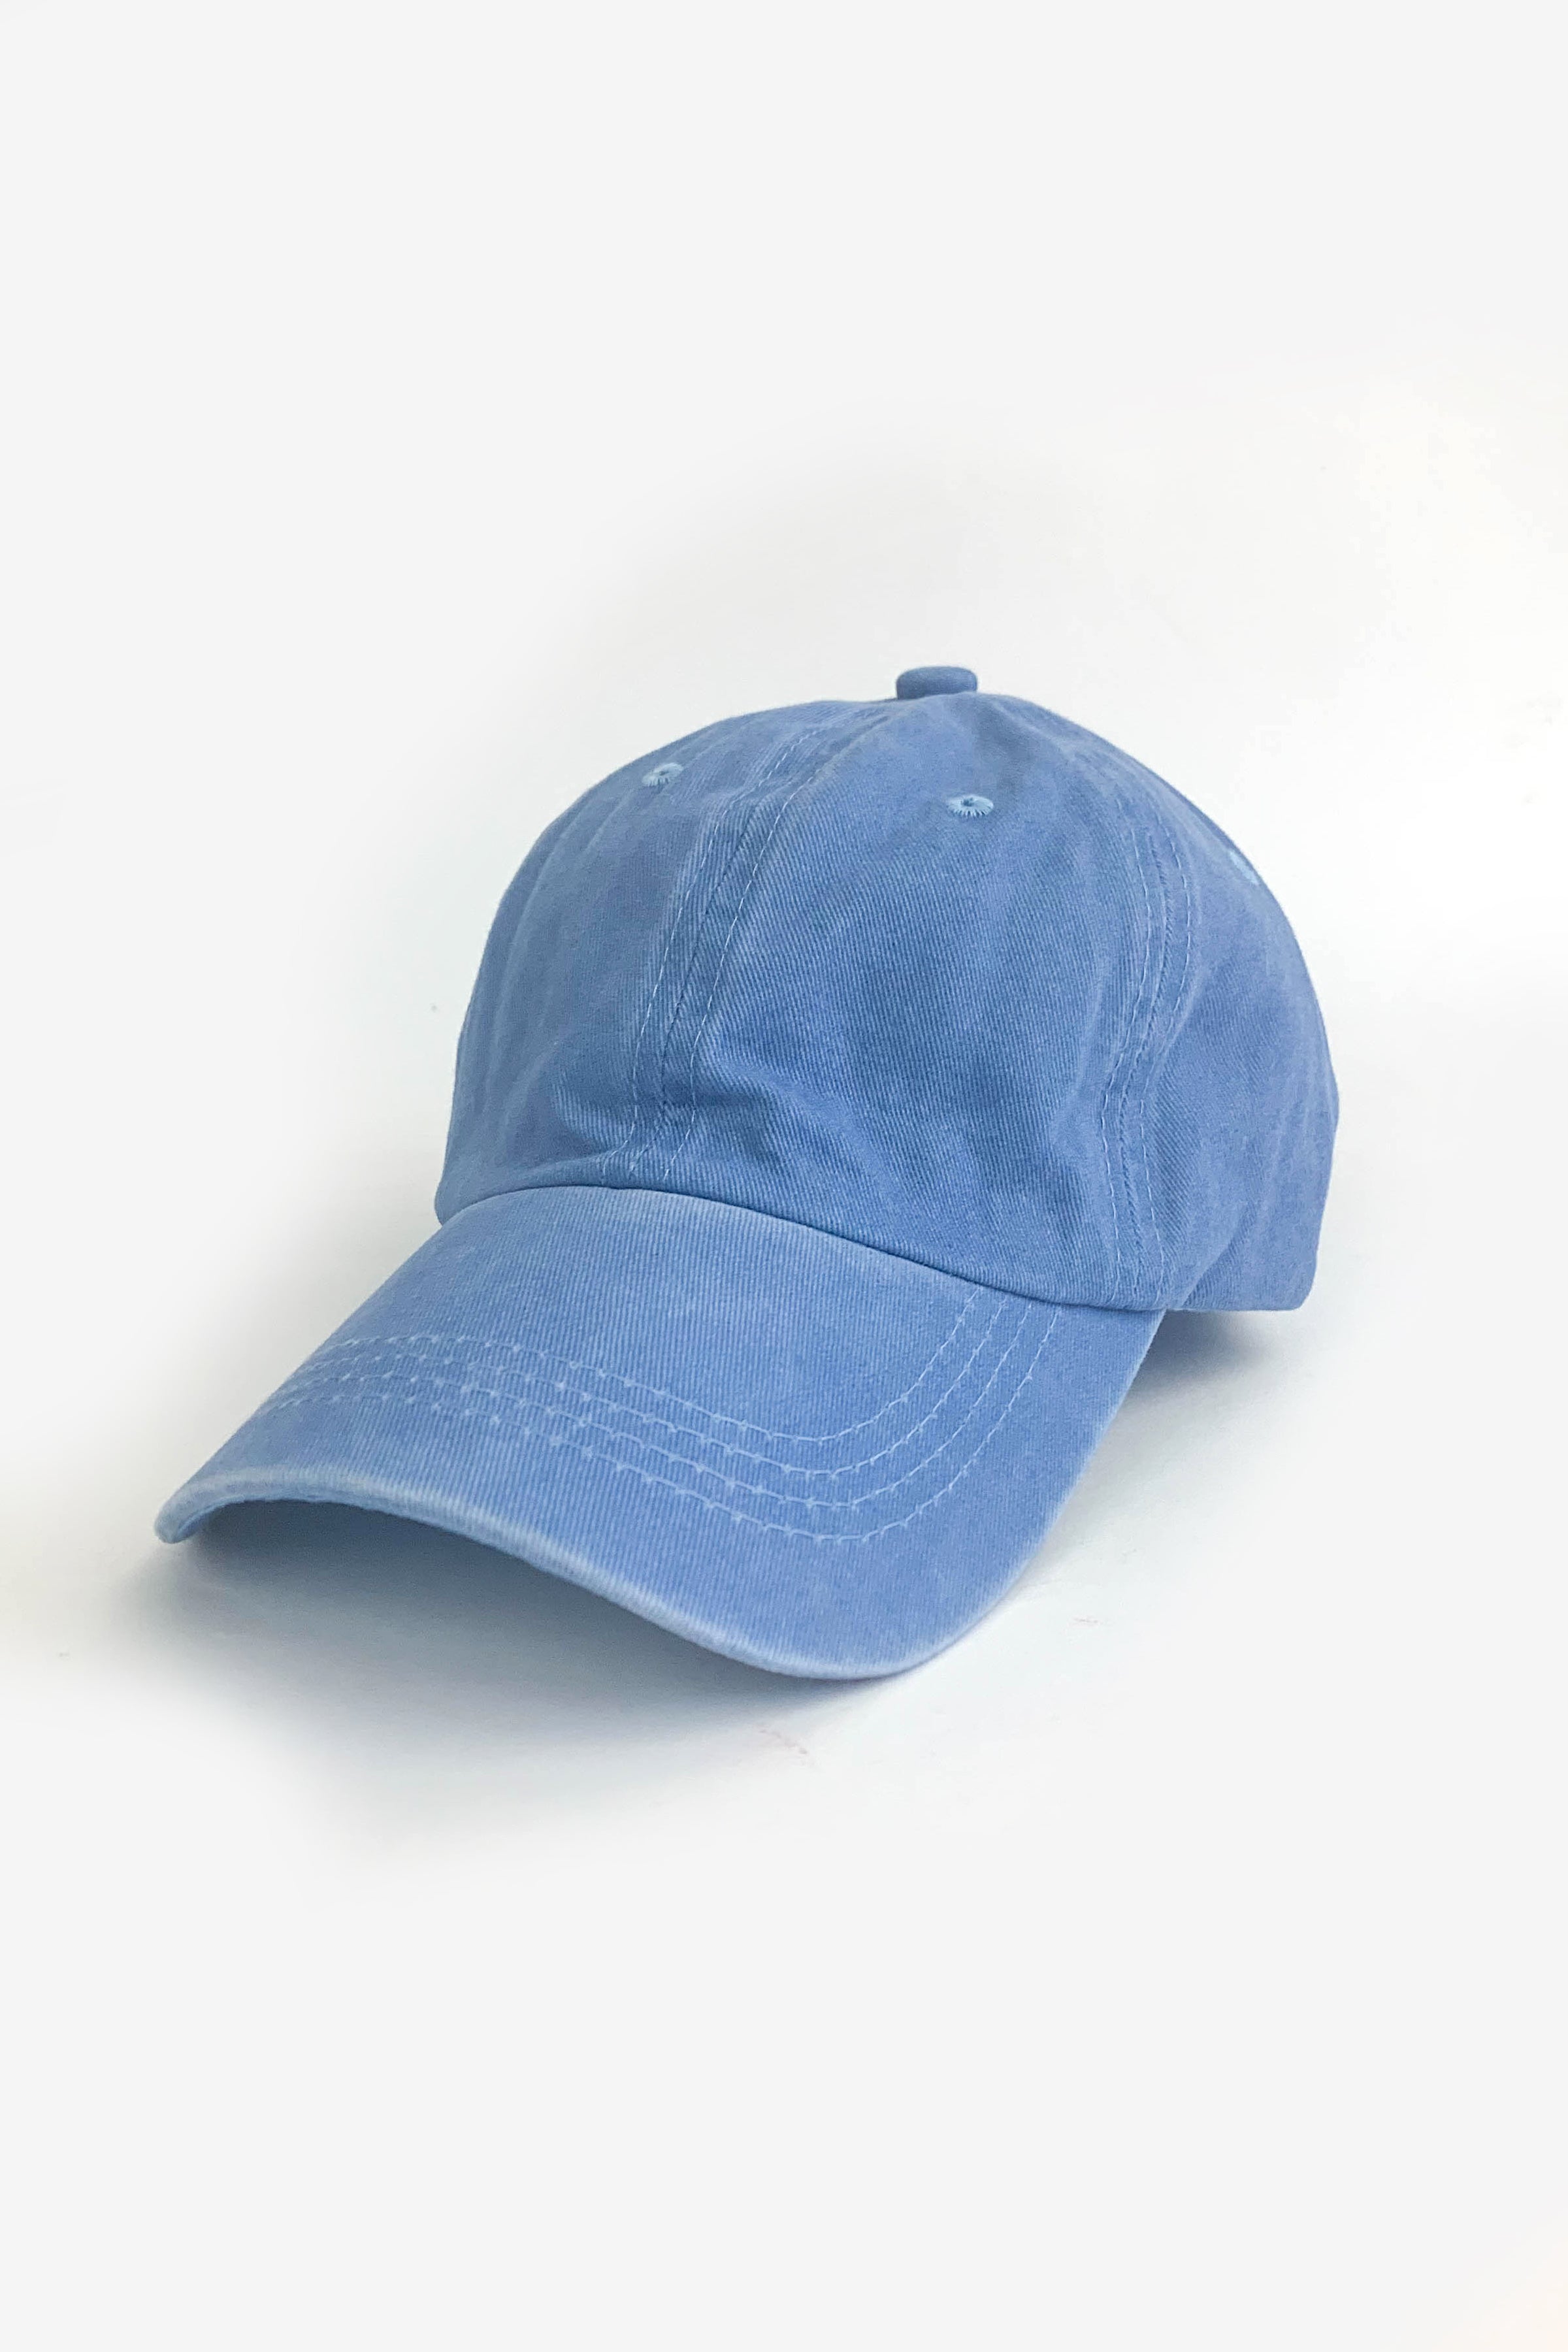 Pigment Dyed Baseball Hat in Powder Blue